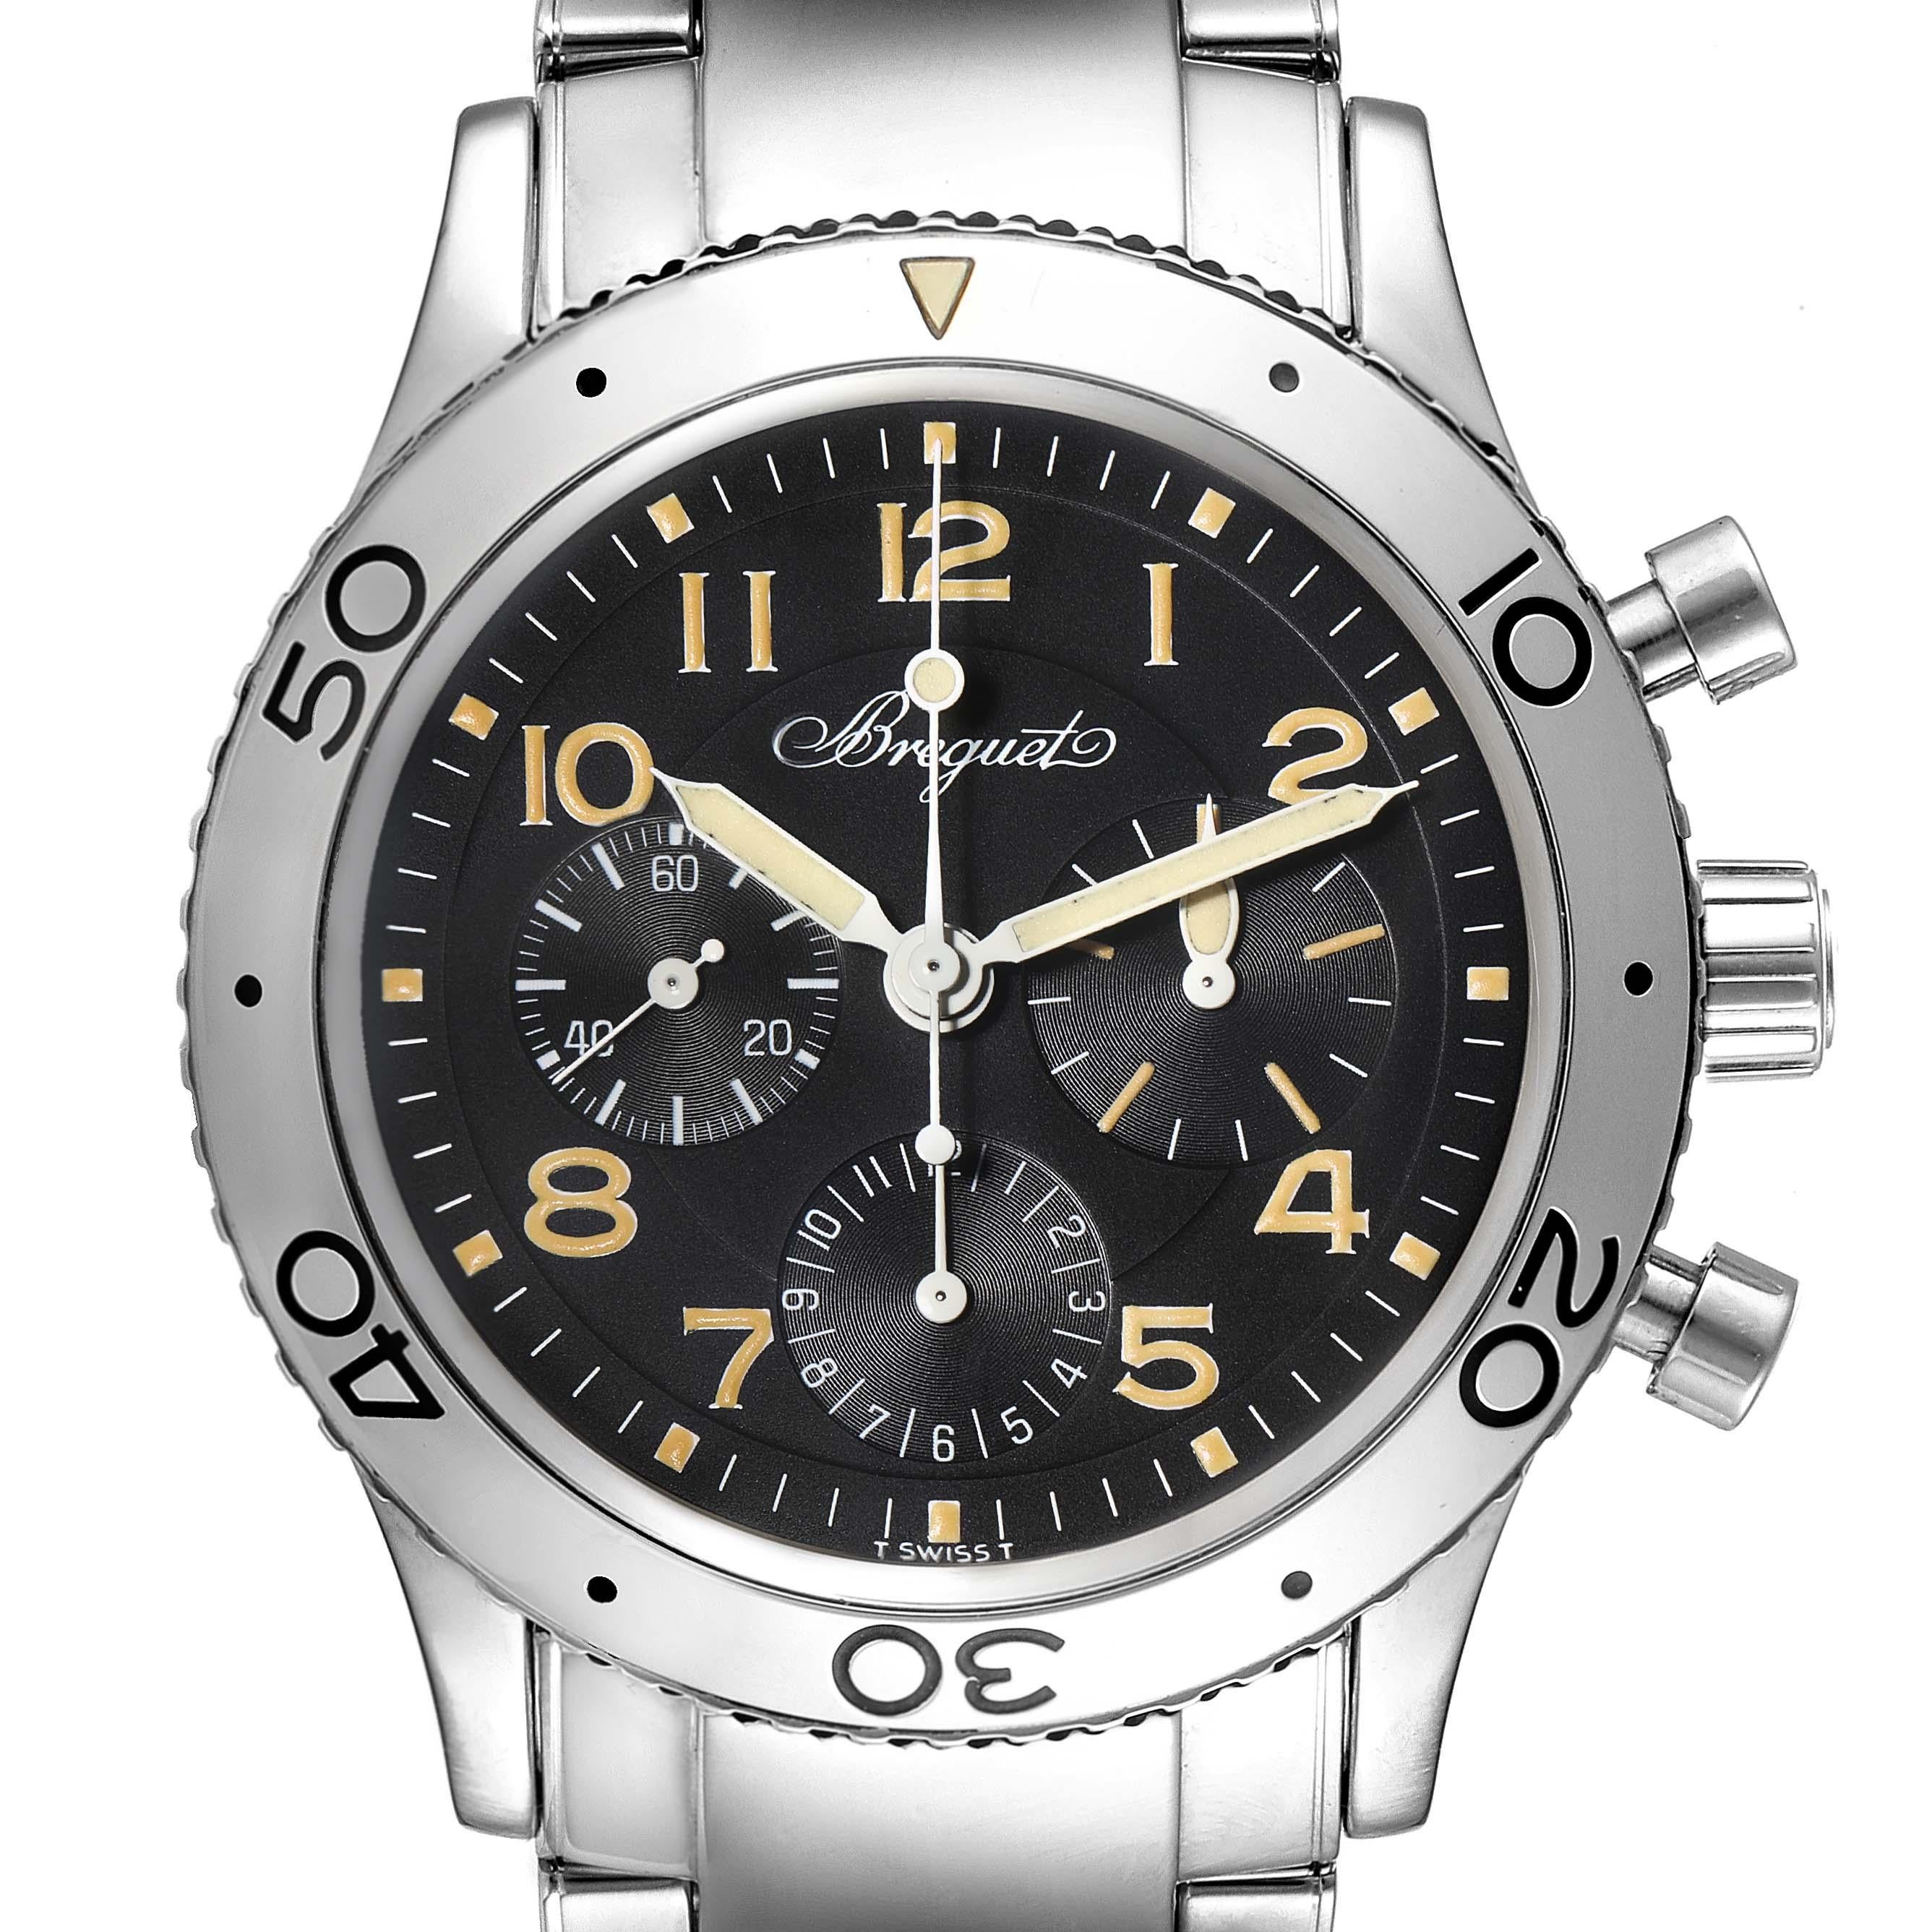 Breguet Aeronavale Type XX Flyback Black Dial Steel Mens Watch 3800. Automatic self-winding movement with a flyback chronograph function (allows instant restarting of the chronograph with a single push of the button instead of stop and reset the